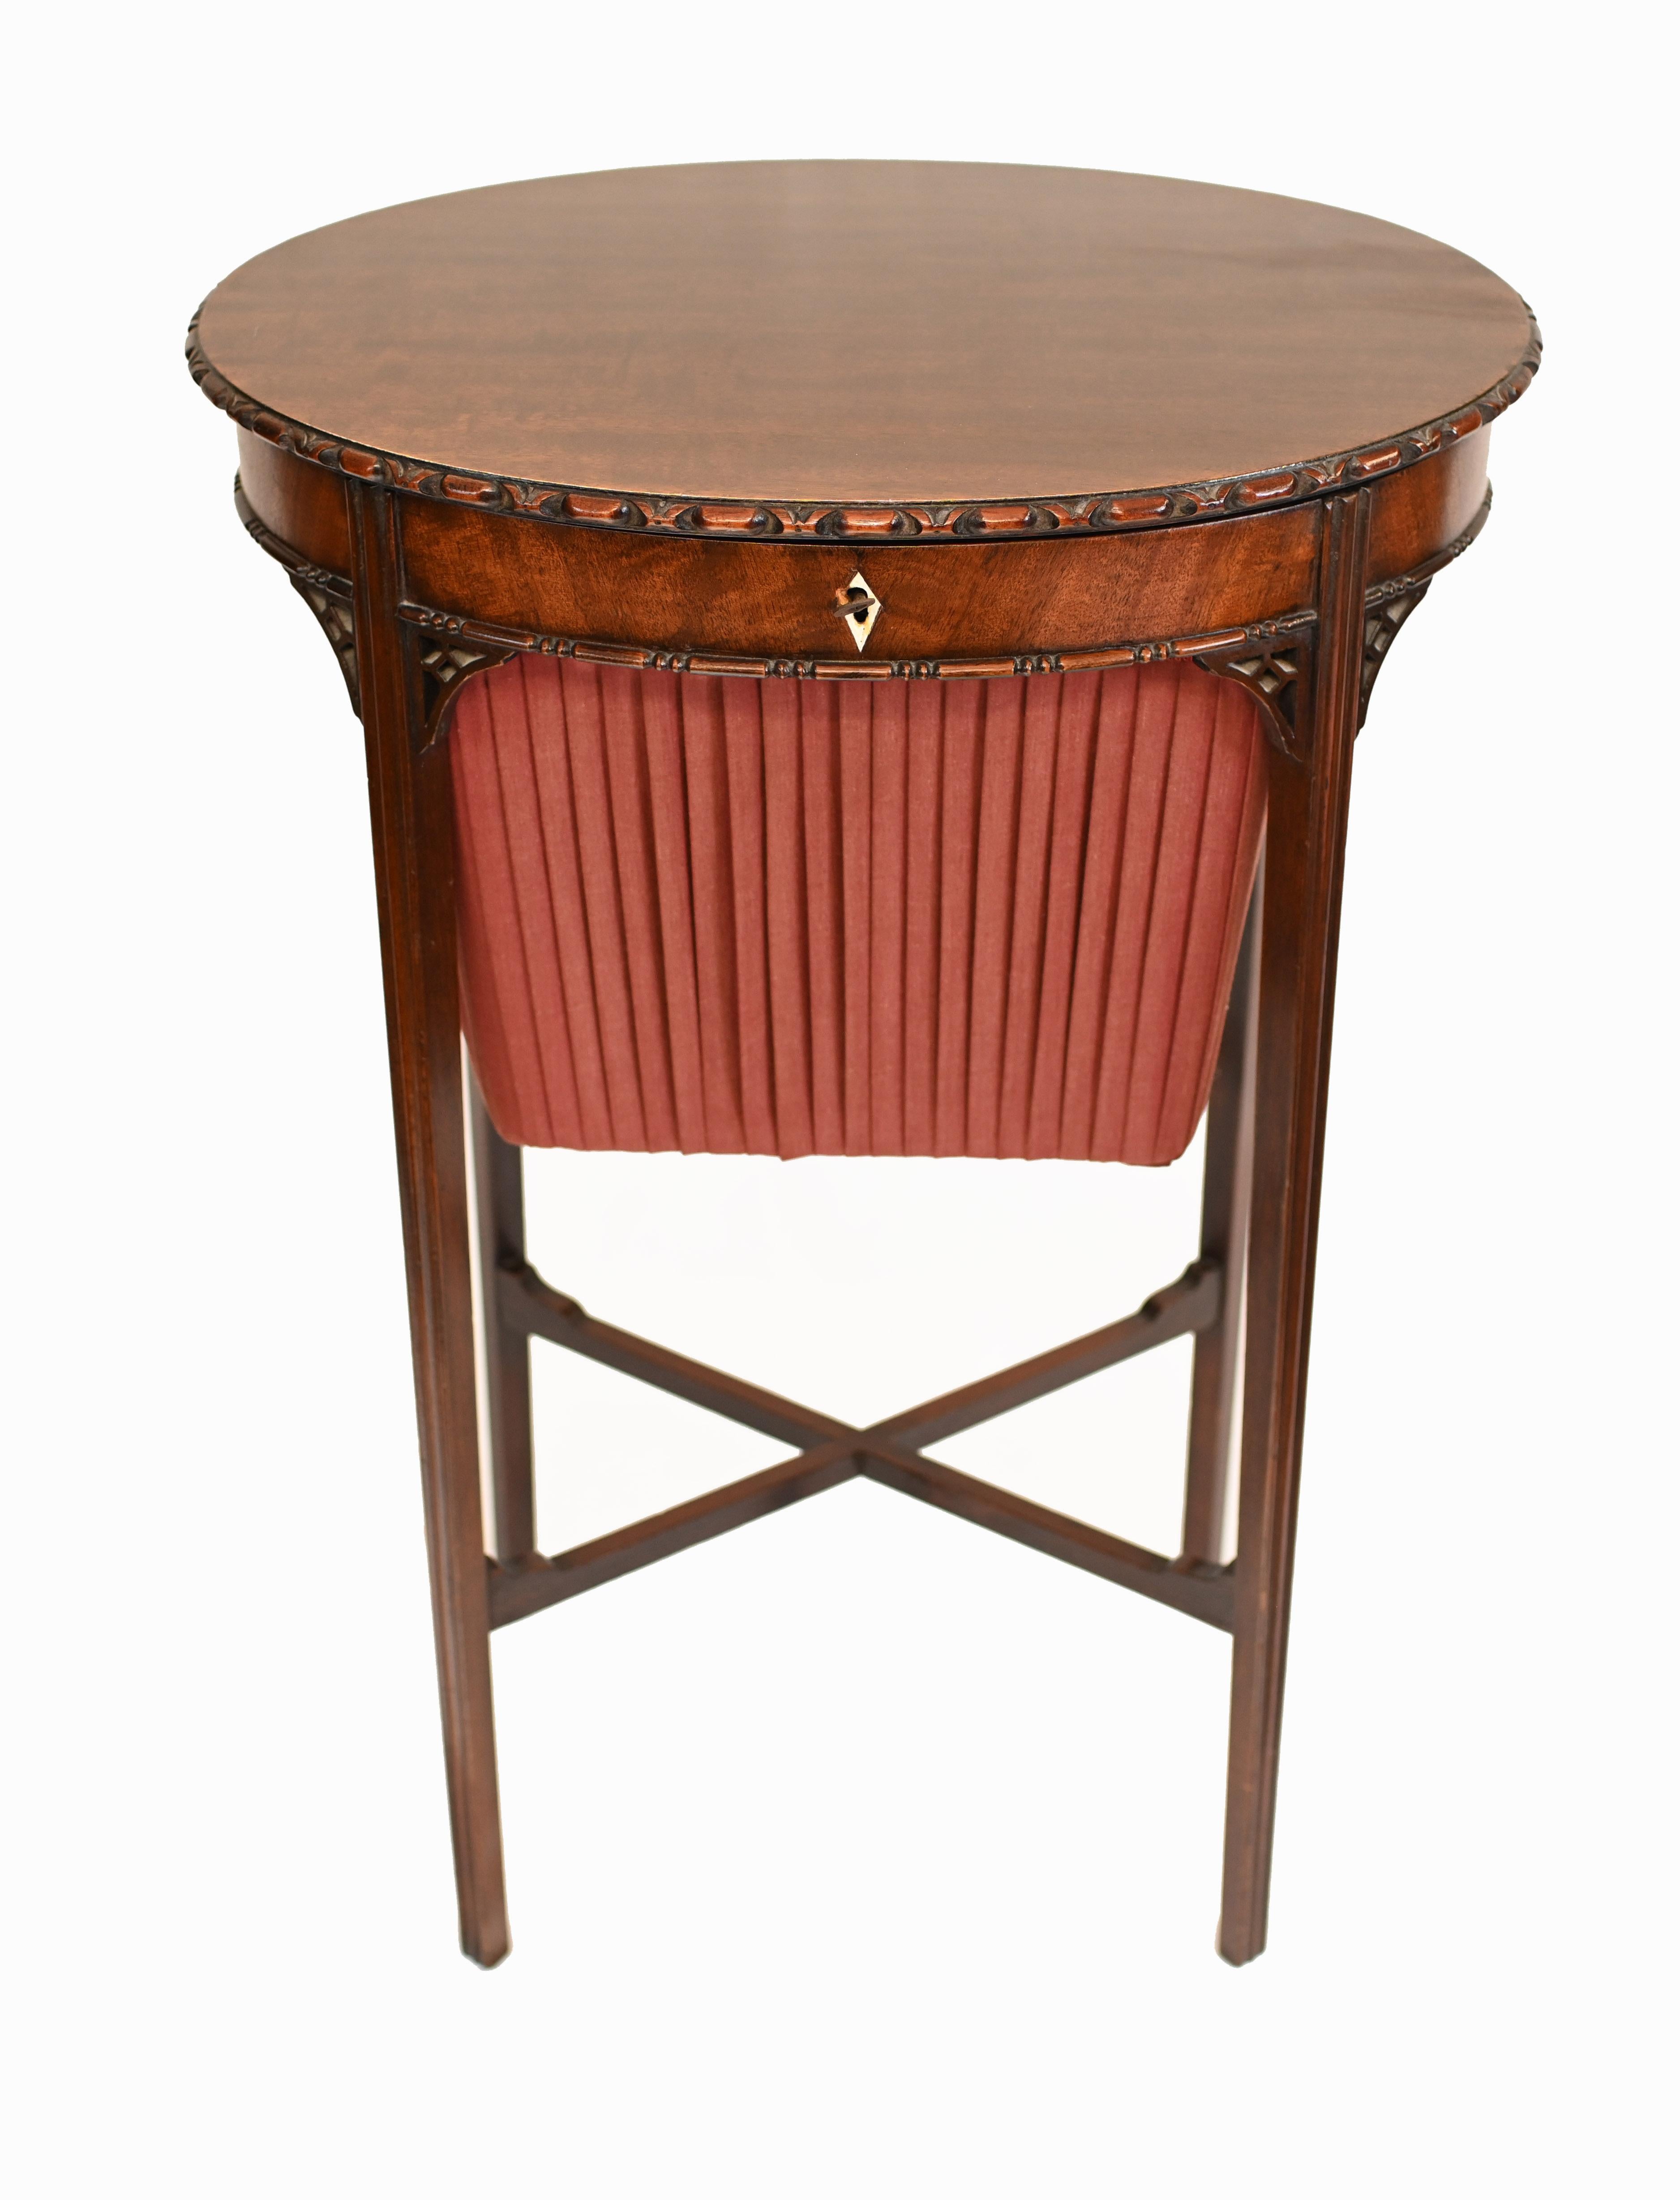 Elegant Edwardian sewing table in mahogany
Great patina to the wood
Features a carved piecrust edging and tapering reeded legs
Circa 1910 on this fine piece of English furniture
Some of our items are in storage so please check ahead of a viewing to